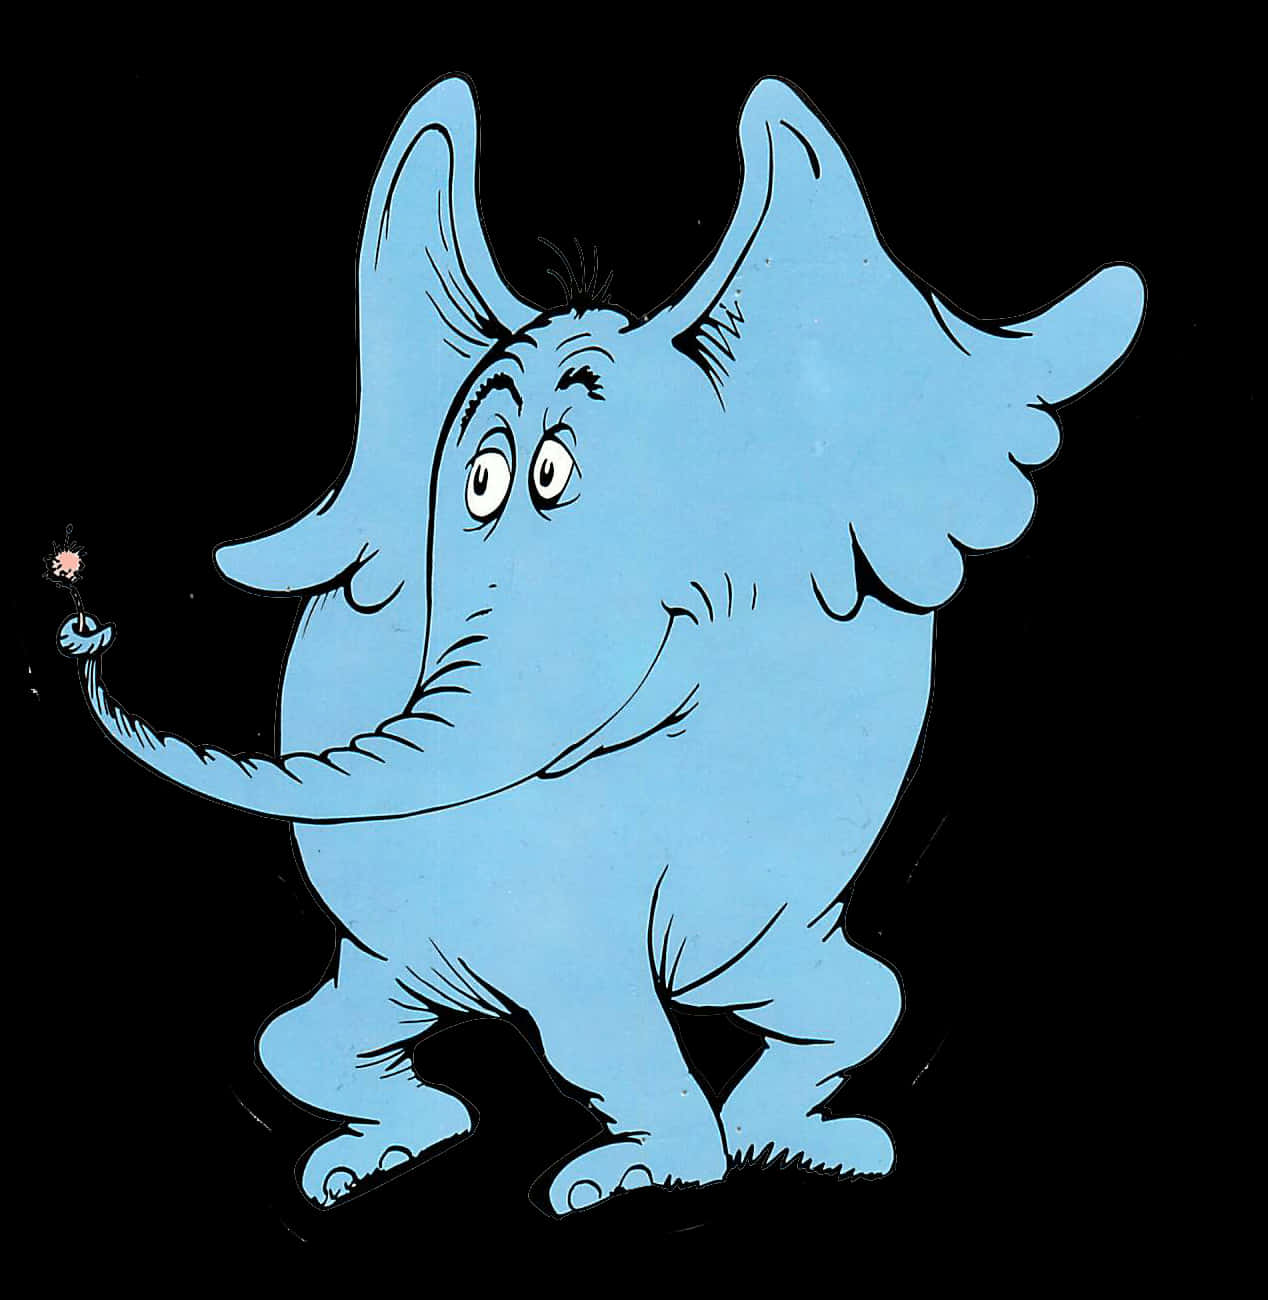 Dr Seuss's Elephant With A Flower In His Mouth Wallpaper